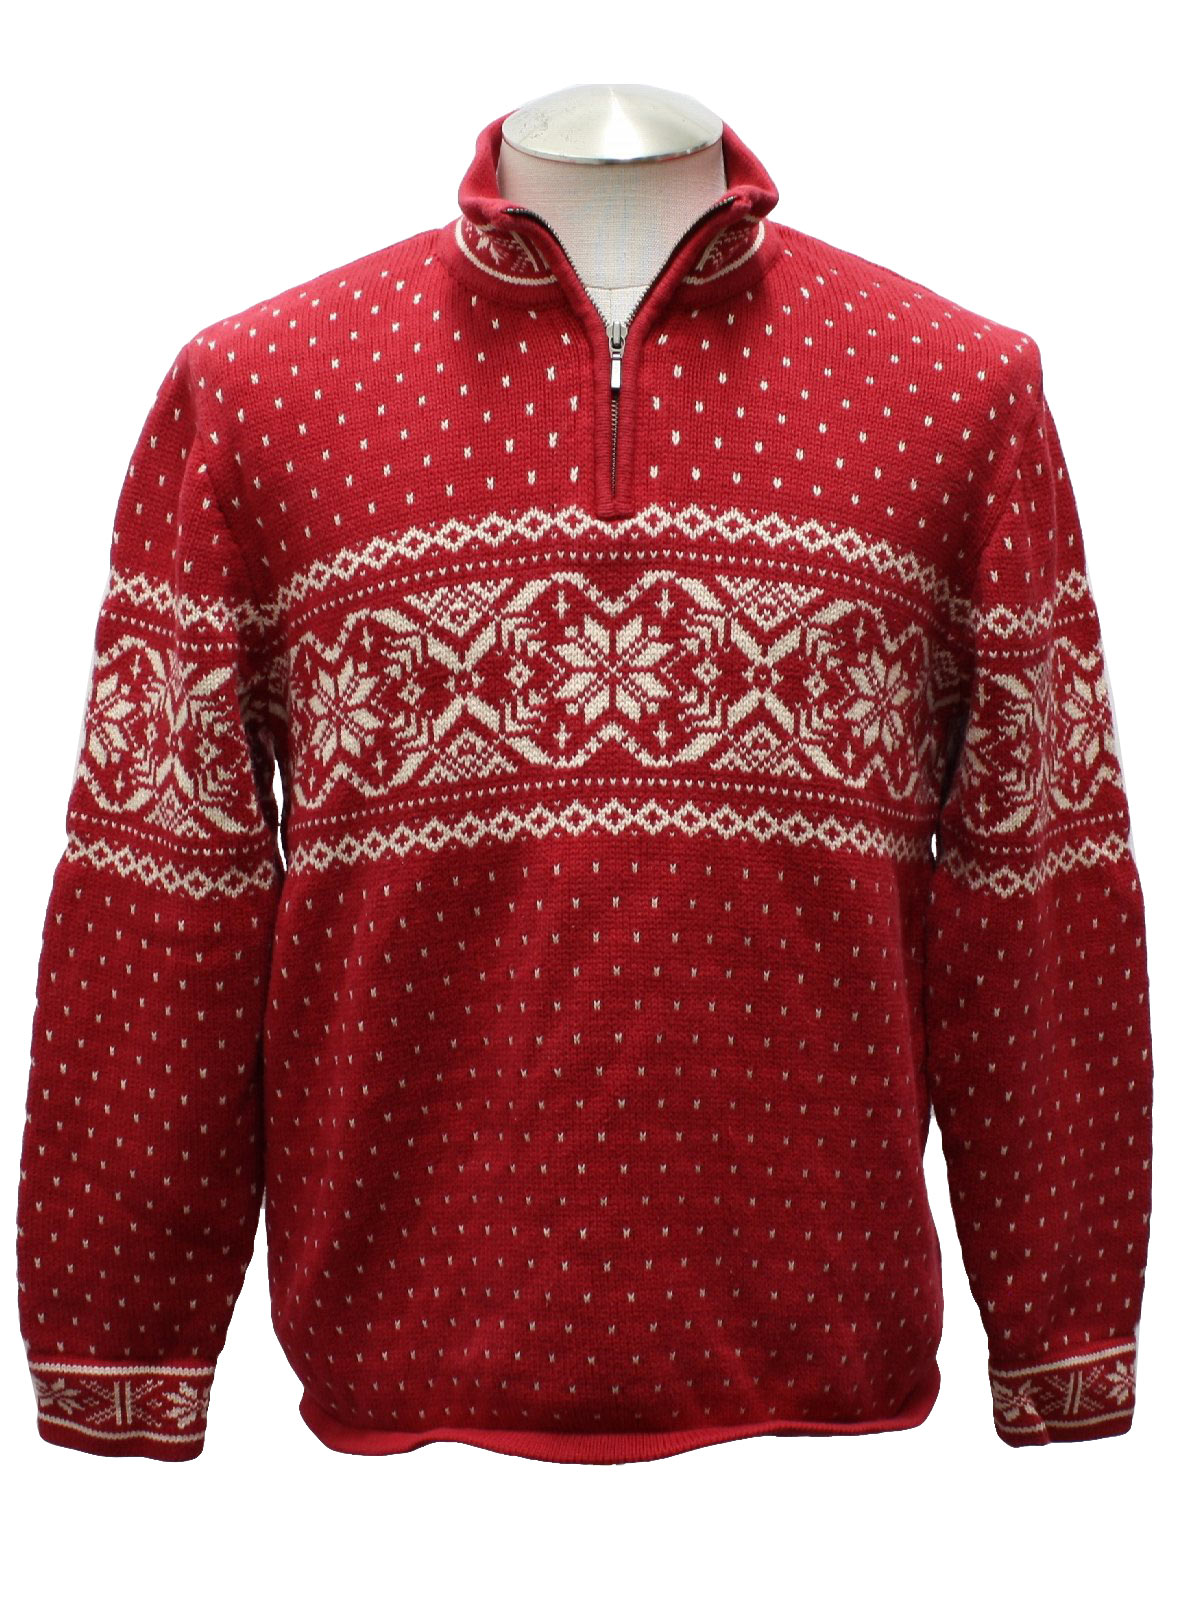 lands end christmas sweater